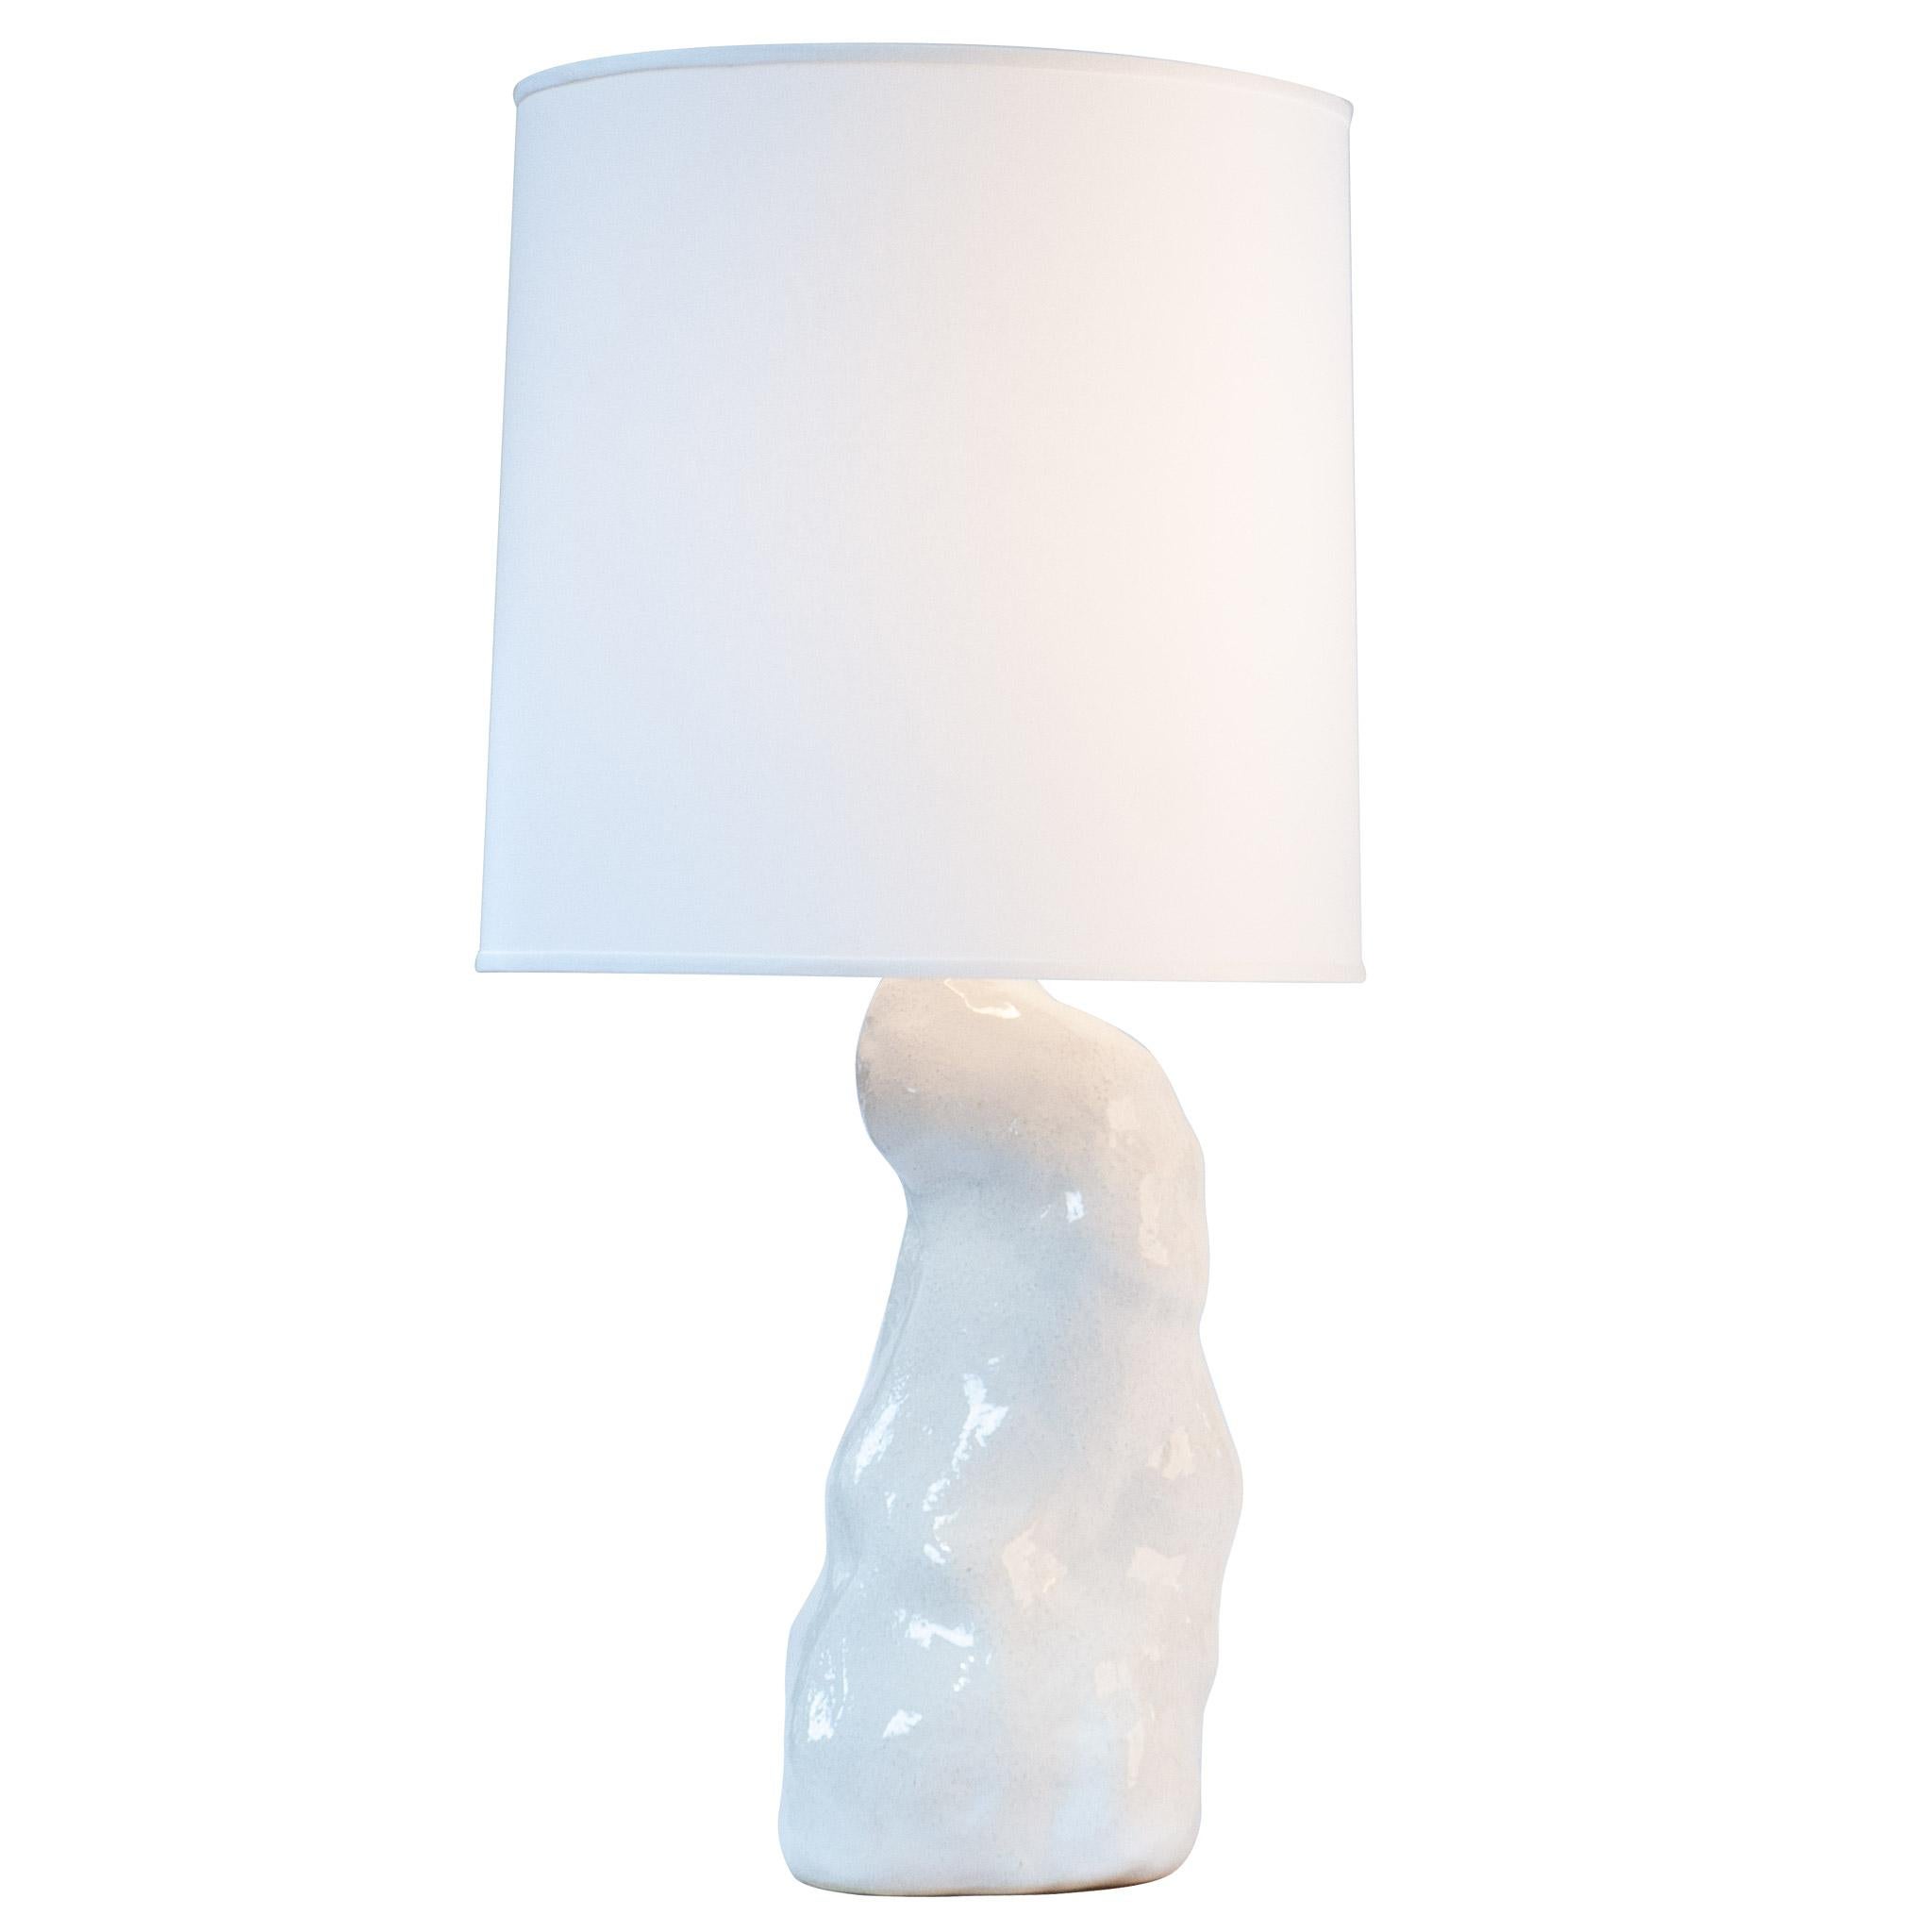 J Schatz Studio 2018 White Amorphous Table Lamp, Pair, One of a Kind In New Condition For Sale In Providence, RI